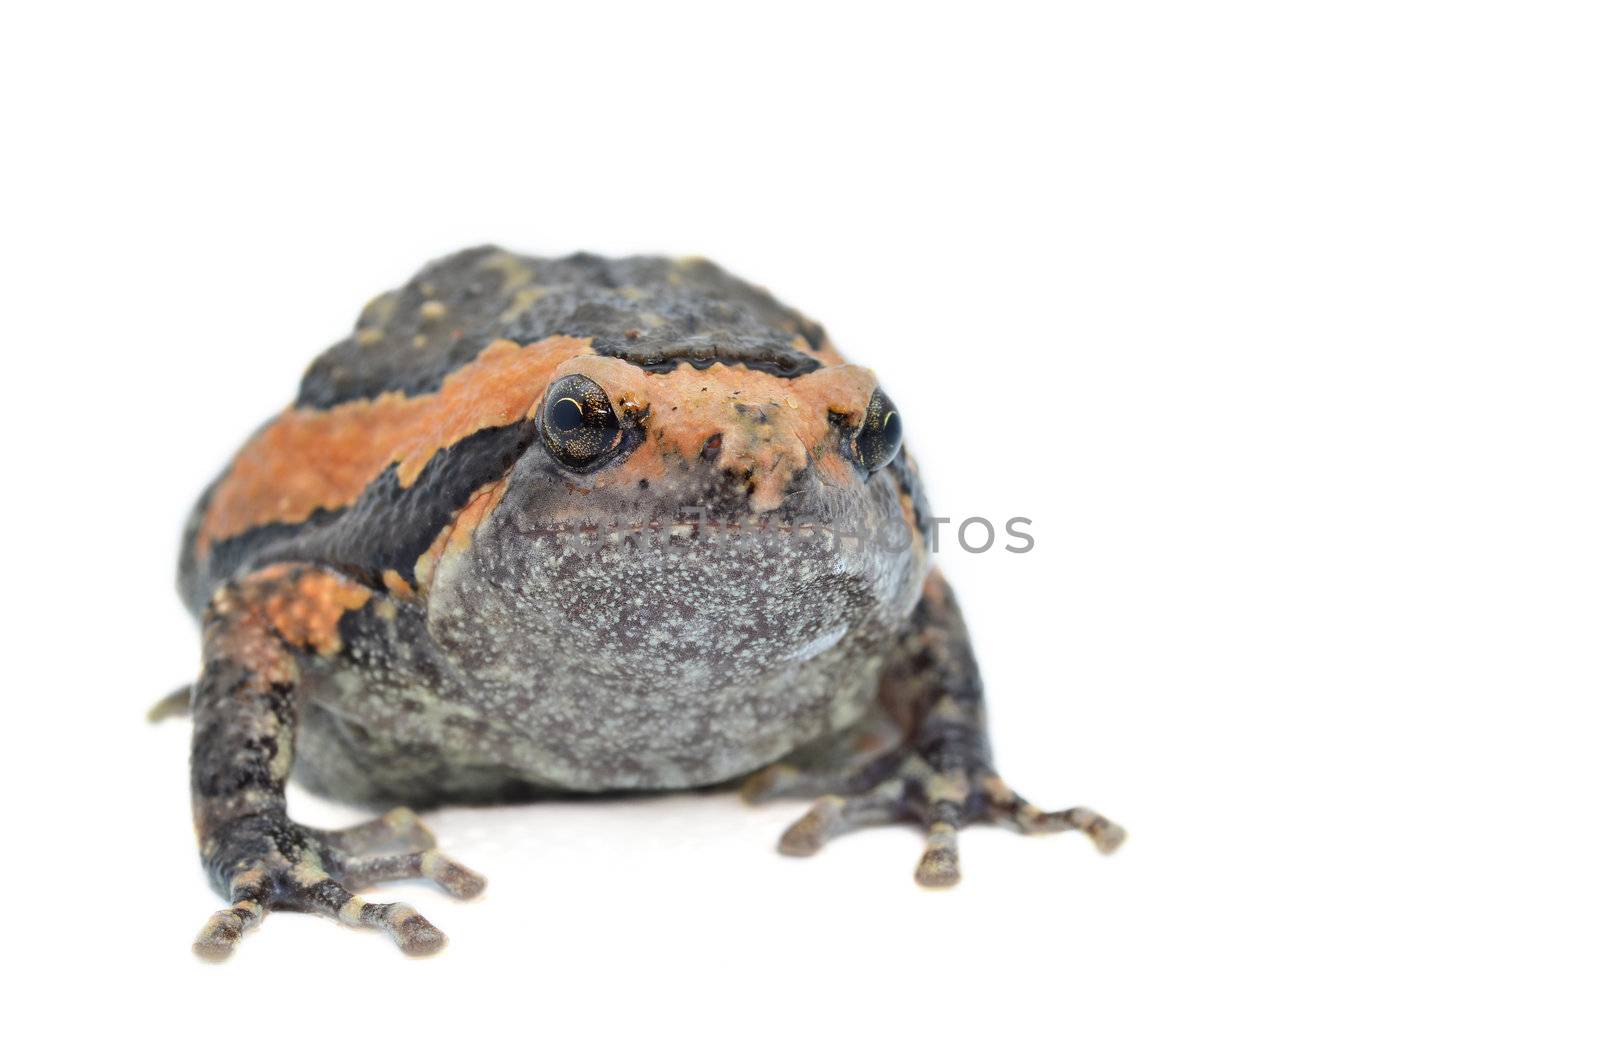 Toad isolated on white